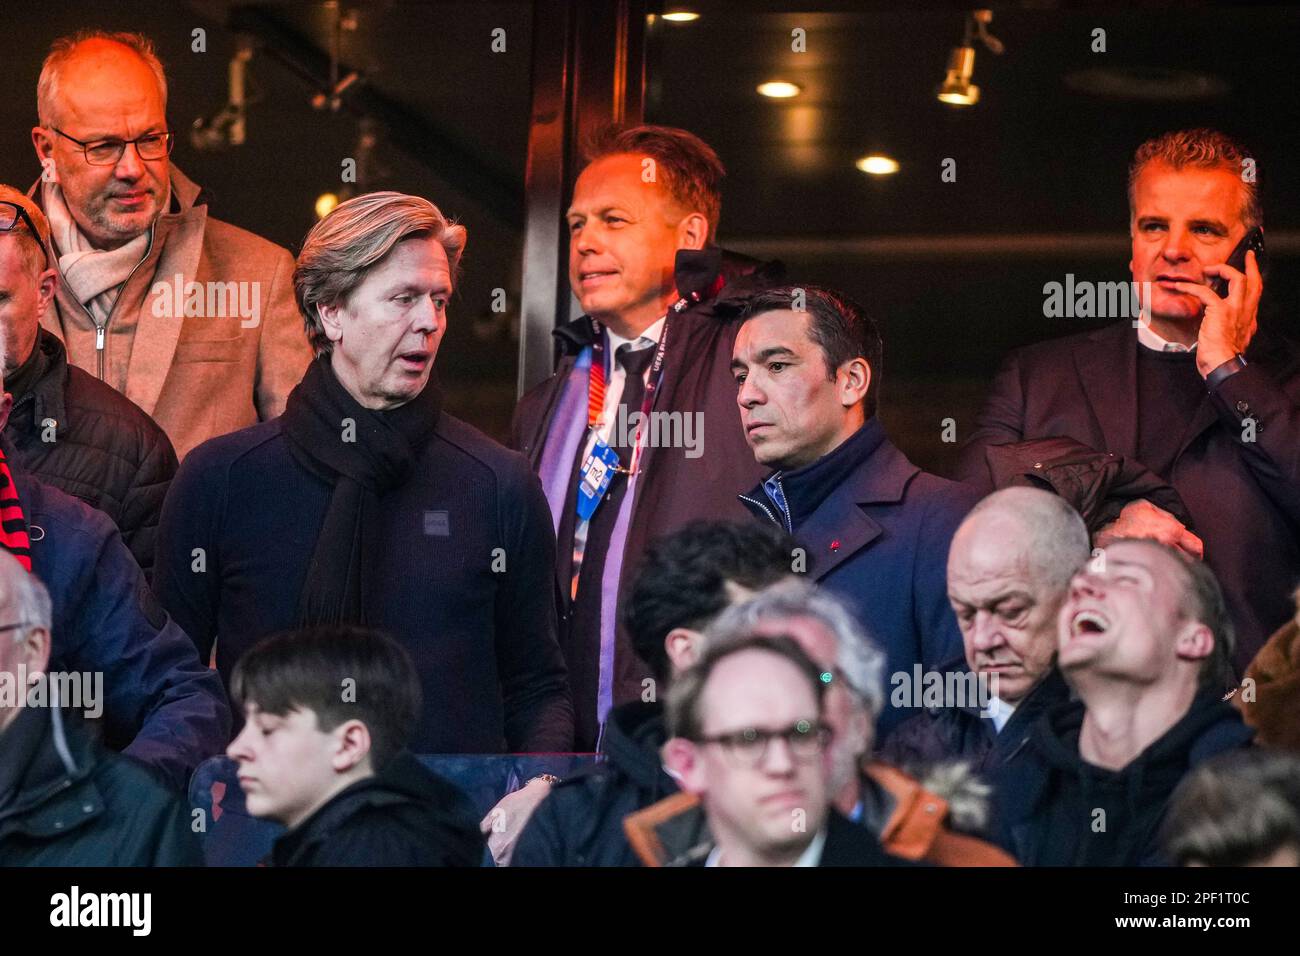 Rotterdam - Jan de Jong, Giovanni van Bronckhorst during the match between Feyenoord v Shakhtar Donetsk at Stadion Feijenoord De Kuip on 16 March 2023 in Rotterdam, the Netherlands. (Box to Box Pictures/Tom Bode) Stock Photo